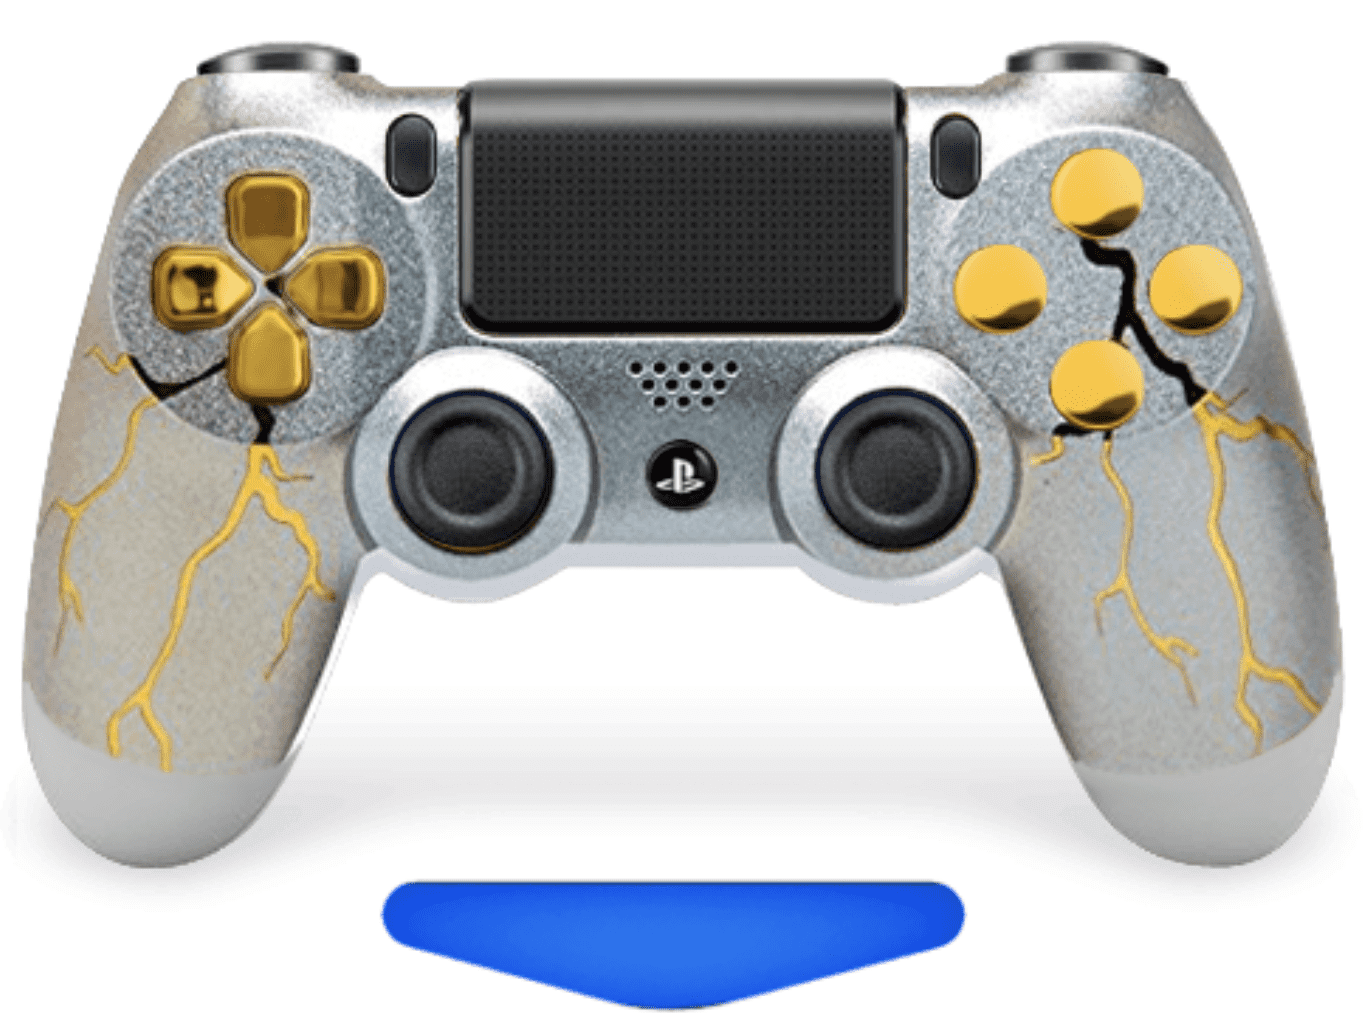 controllers at walmart ps4